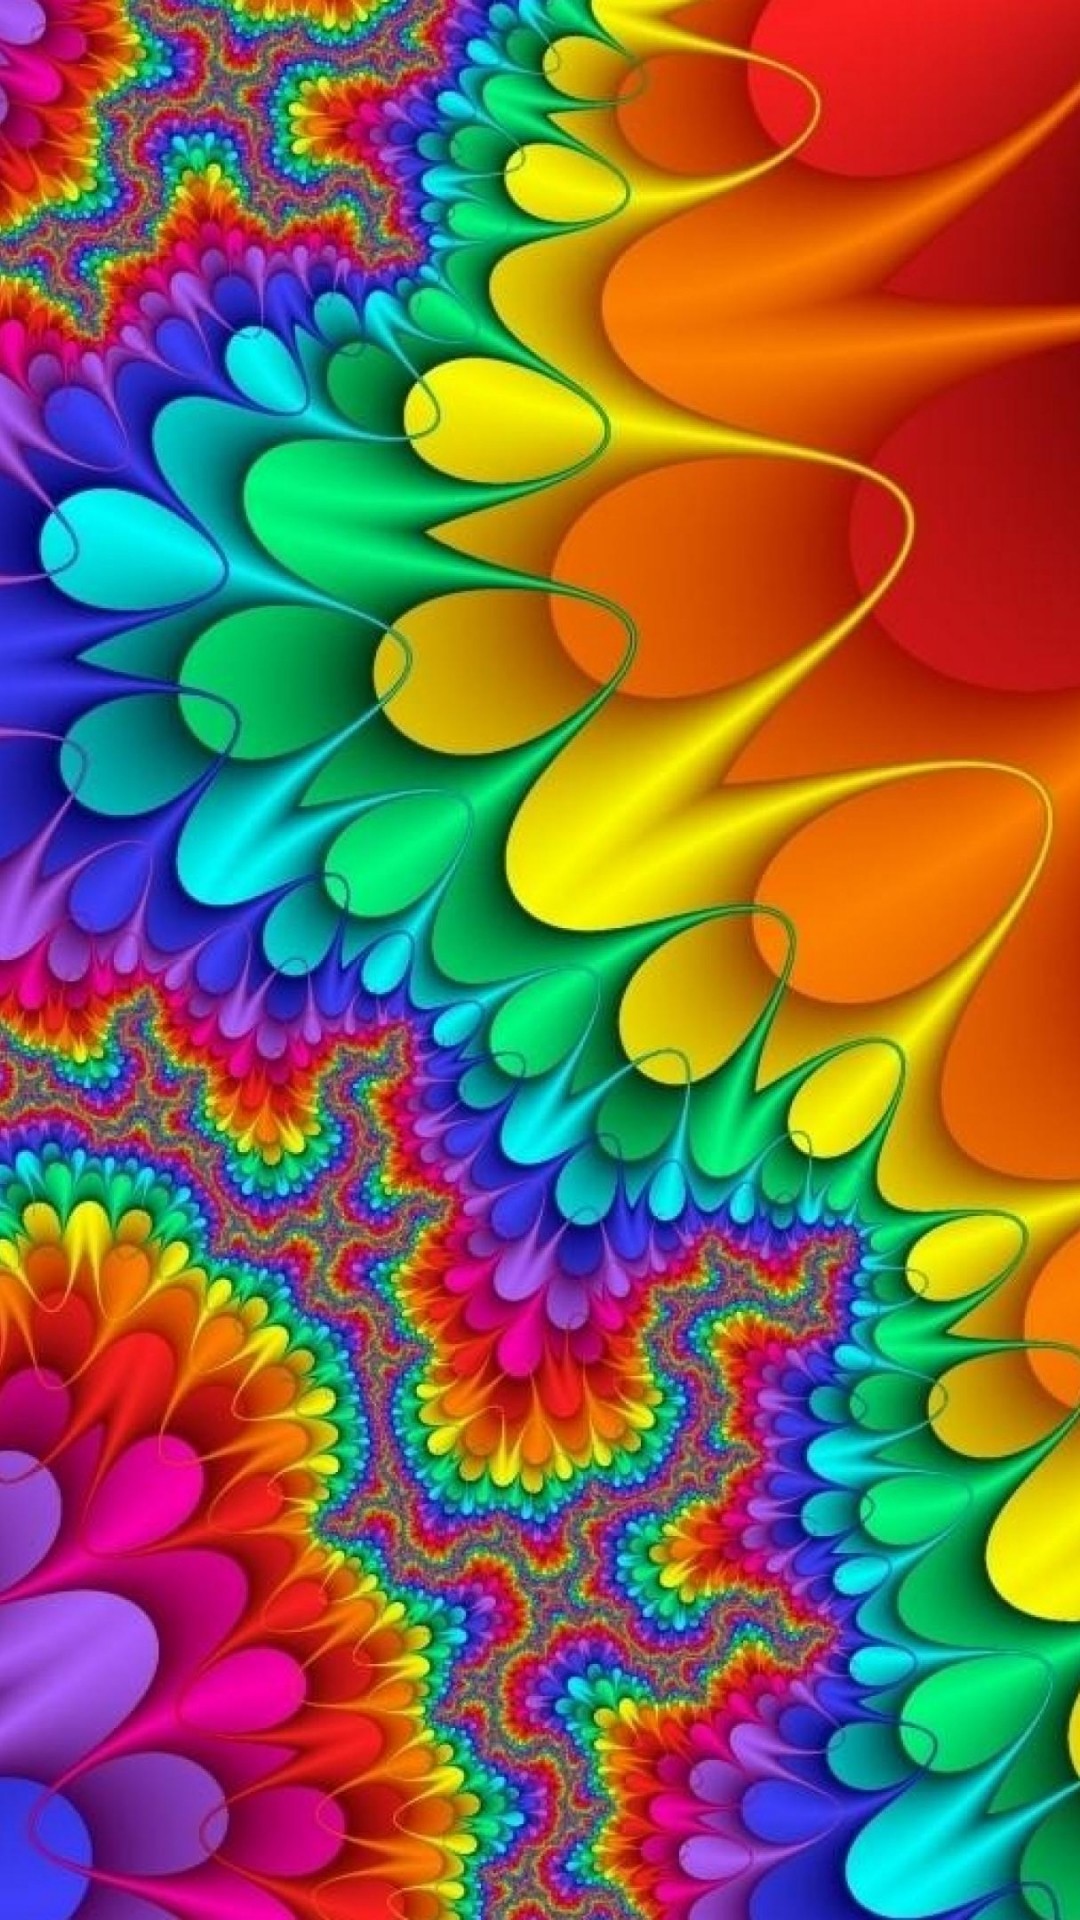 Colorful wallpaper for iphone